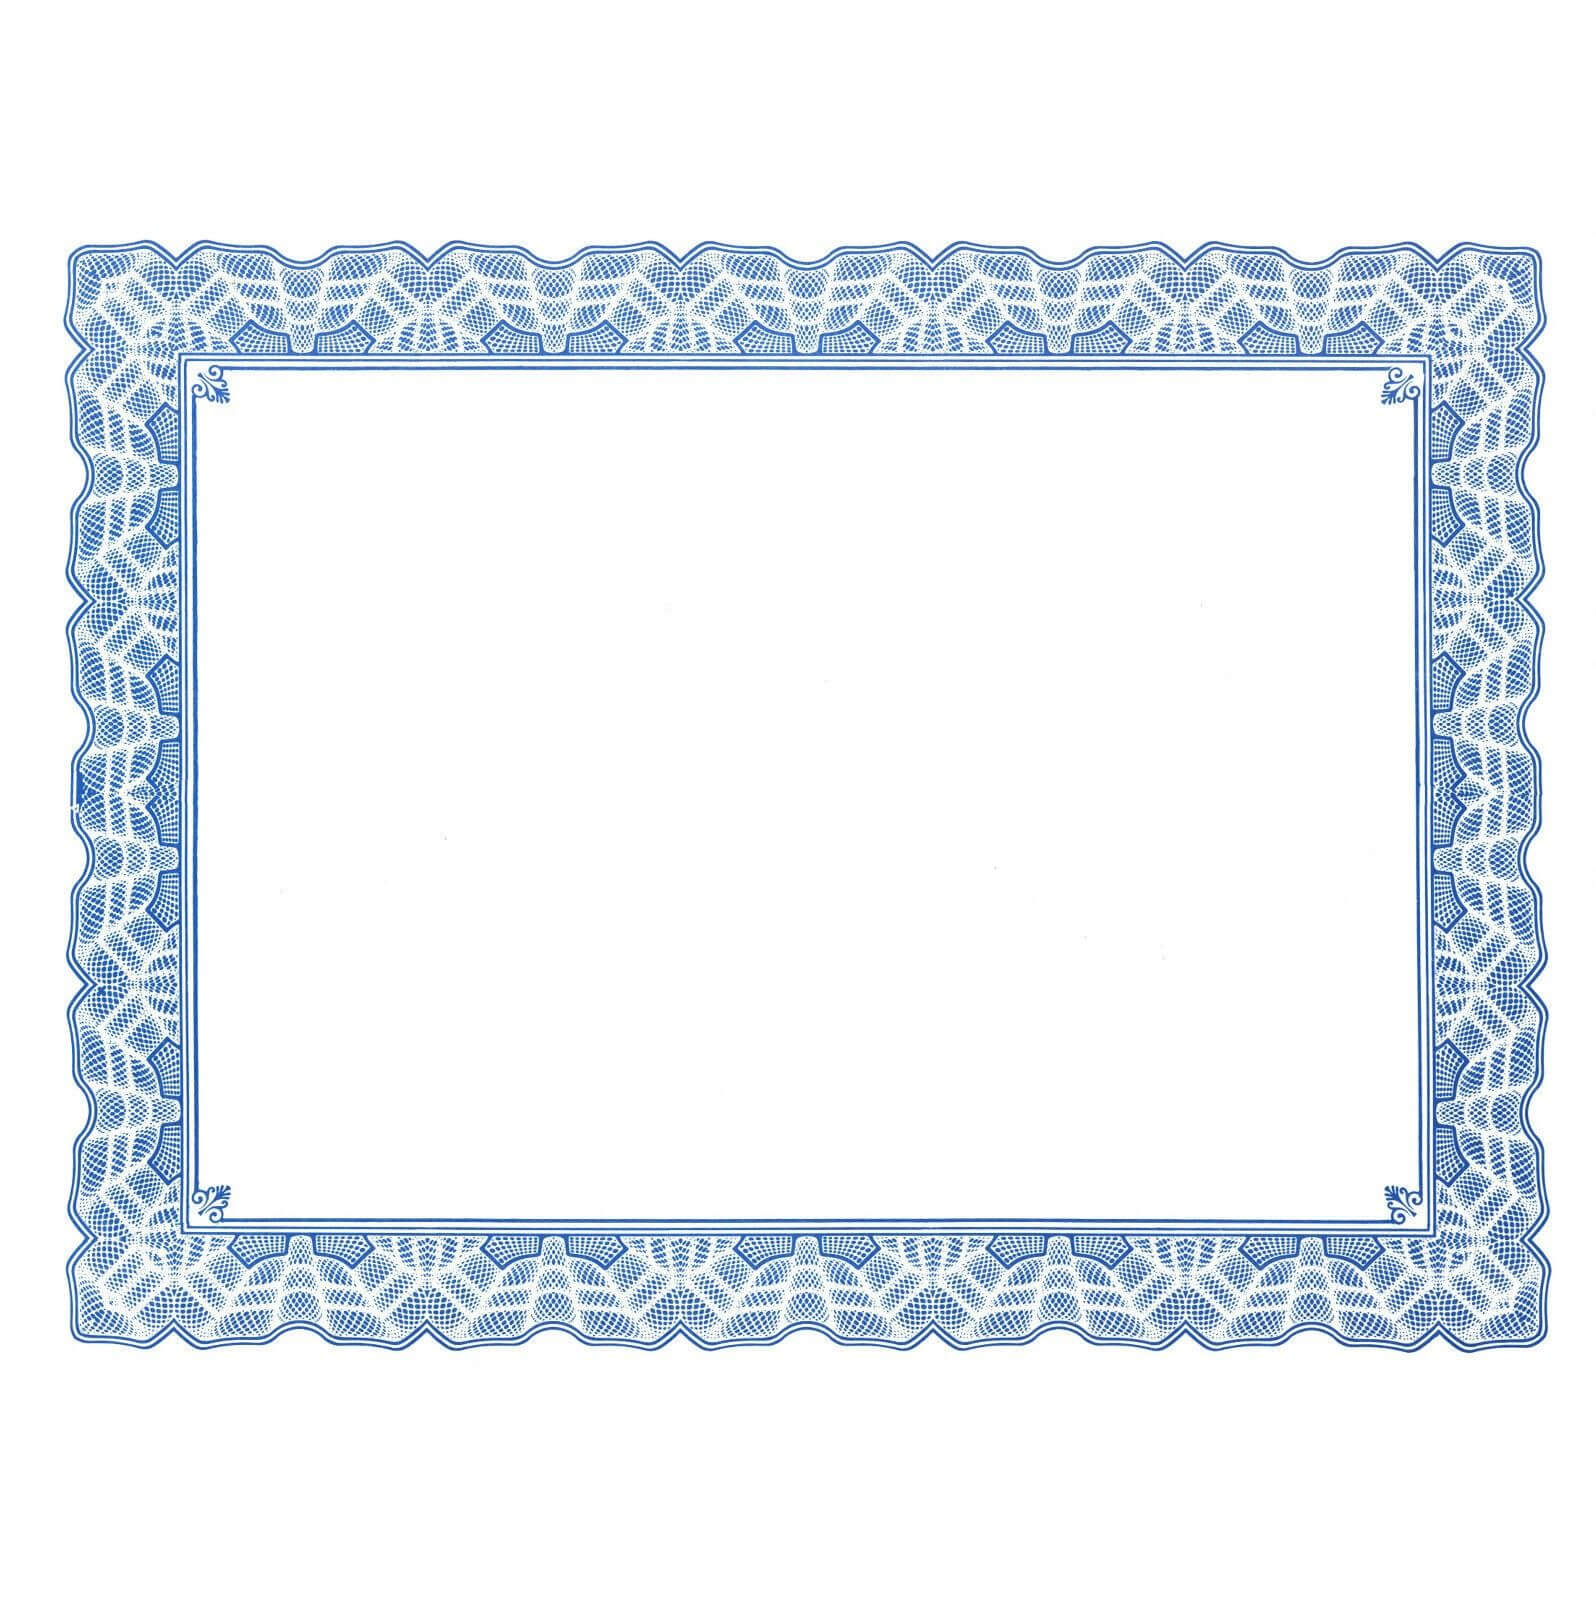 Free Certificate Border Templates For Word For Free Certificate Templates For Word 2007